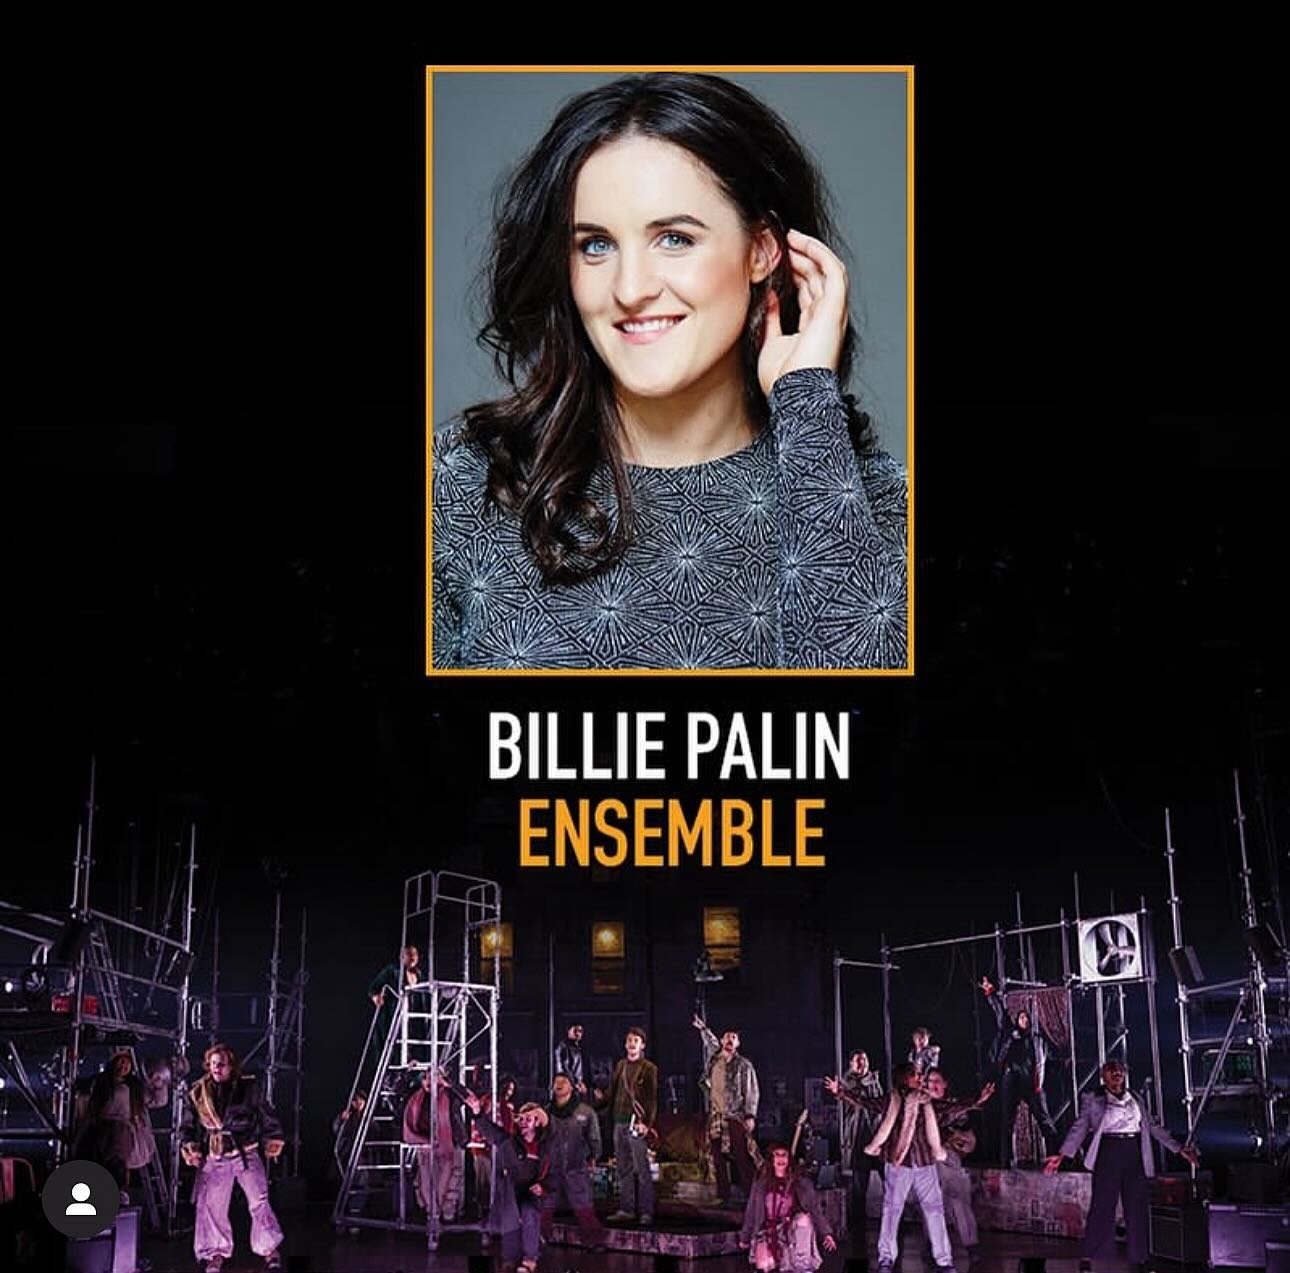 Another exciting cast announcement!! Today we are thrilled to share that the incomparable @billie_palin will be joining the cast of @rentmusicalau 🎉
We are so thrilled for you, and can&rsquo;t wait to see you in this one! 🙌🏽
#rentmusicalau #castan